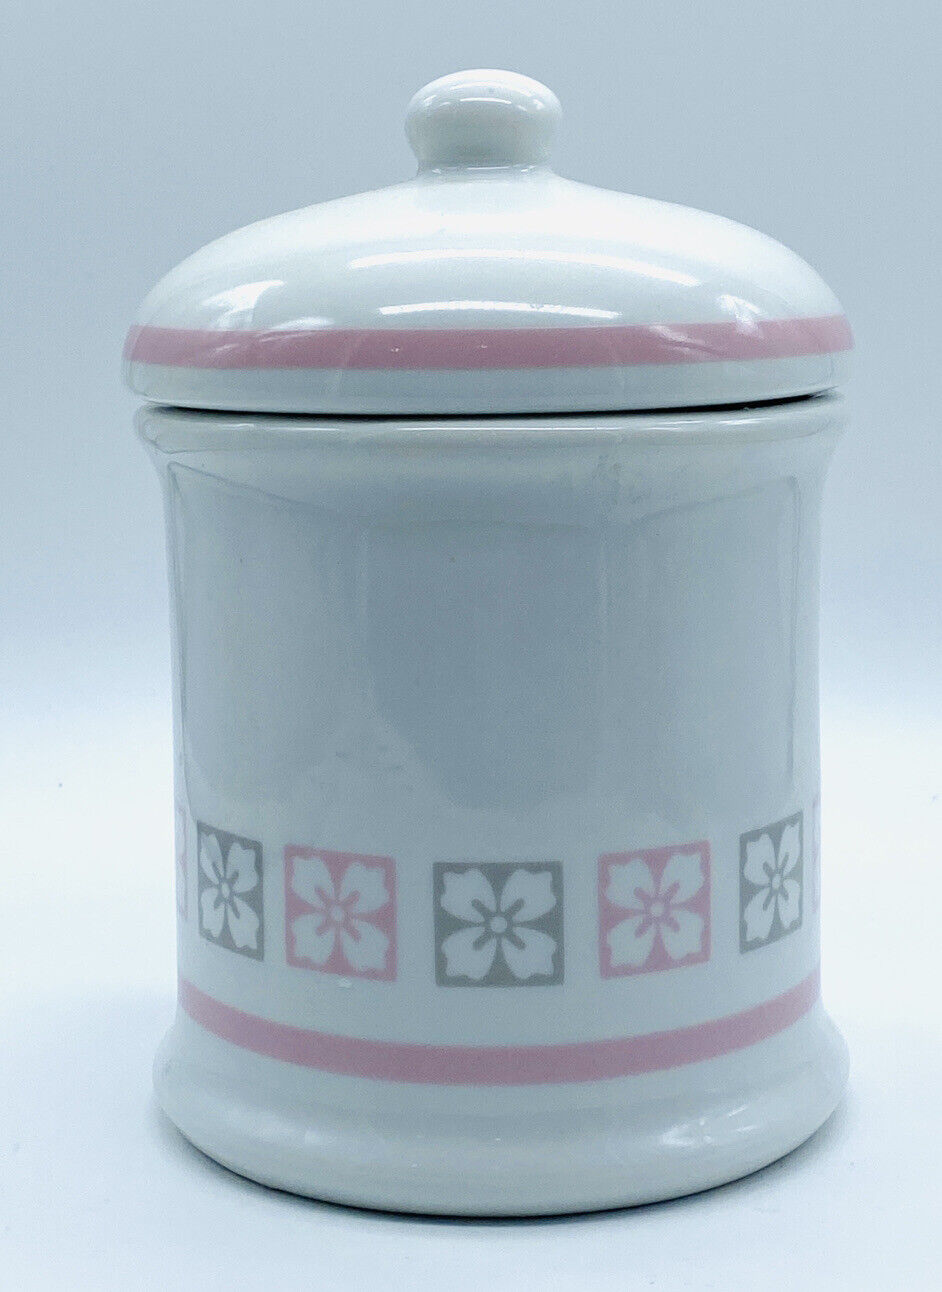 Avon 1987 Porcelain Apothecary Jar White with Grey Pink Accents